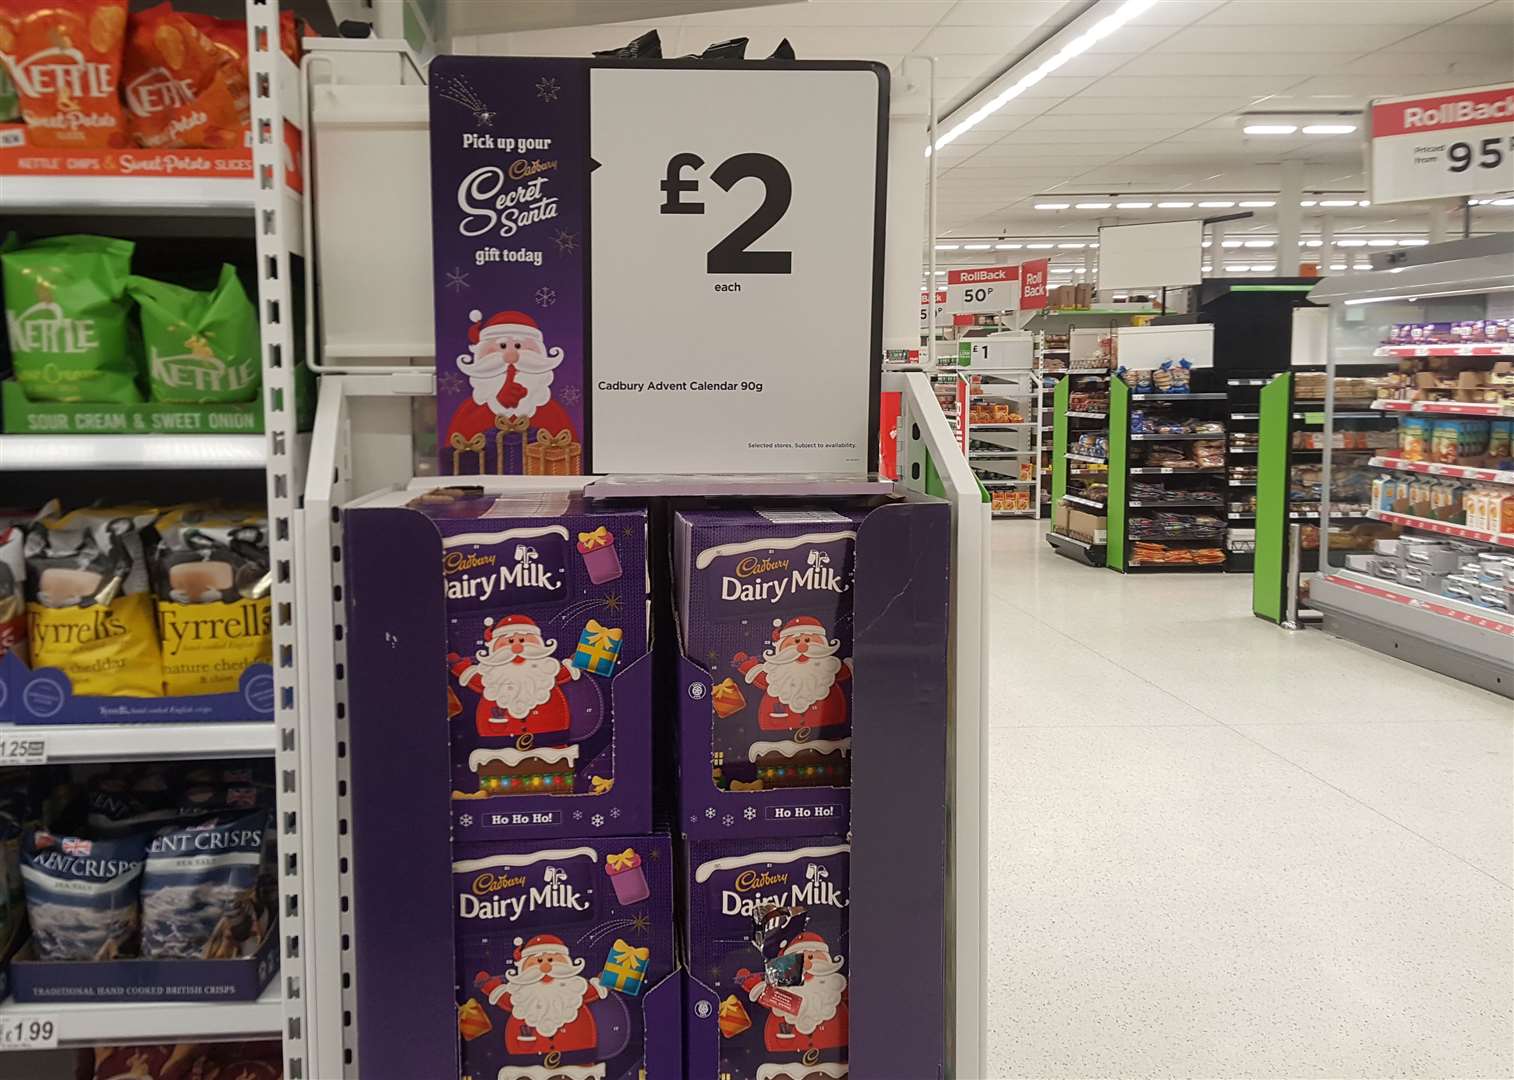 Advent calendars are already on sale in Asda's Kings Hill branch